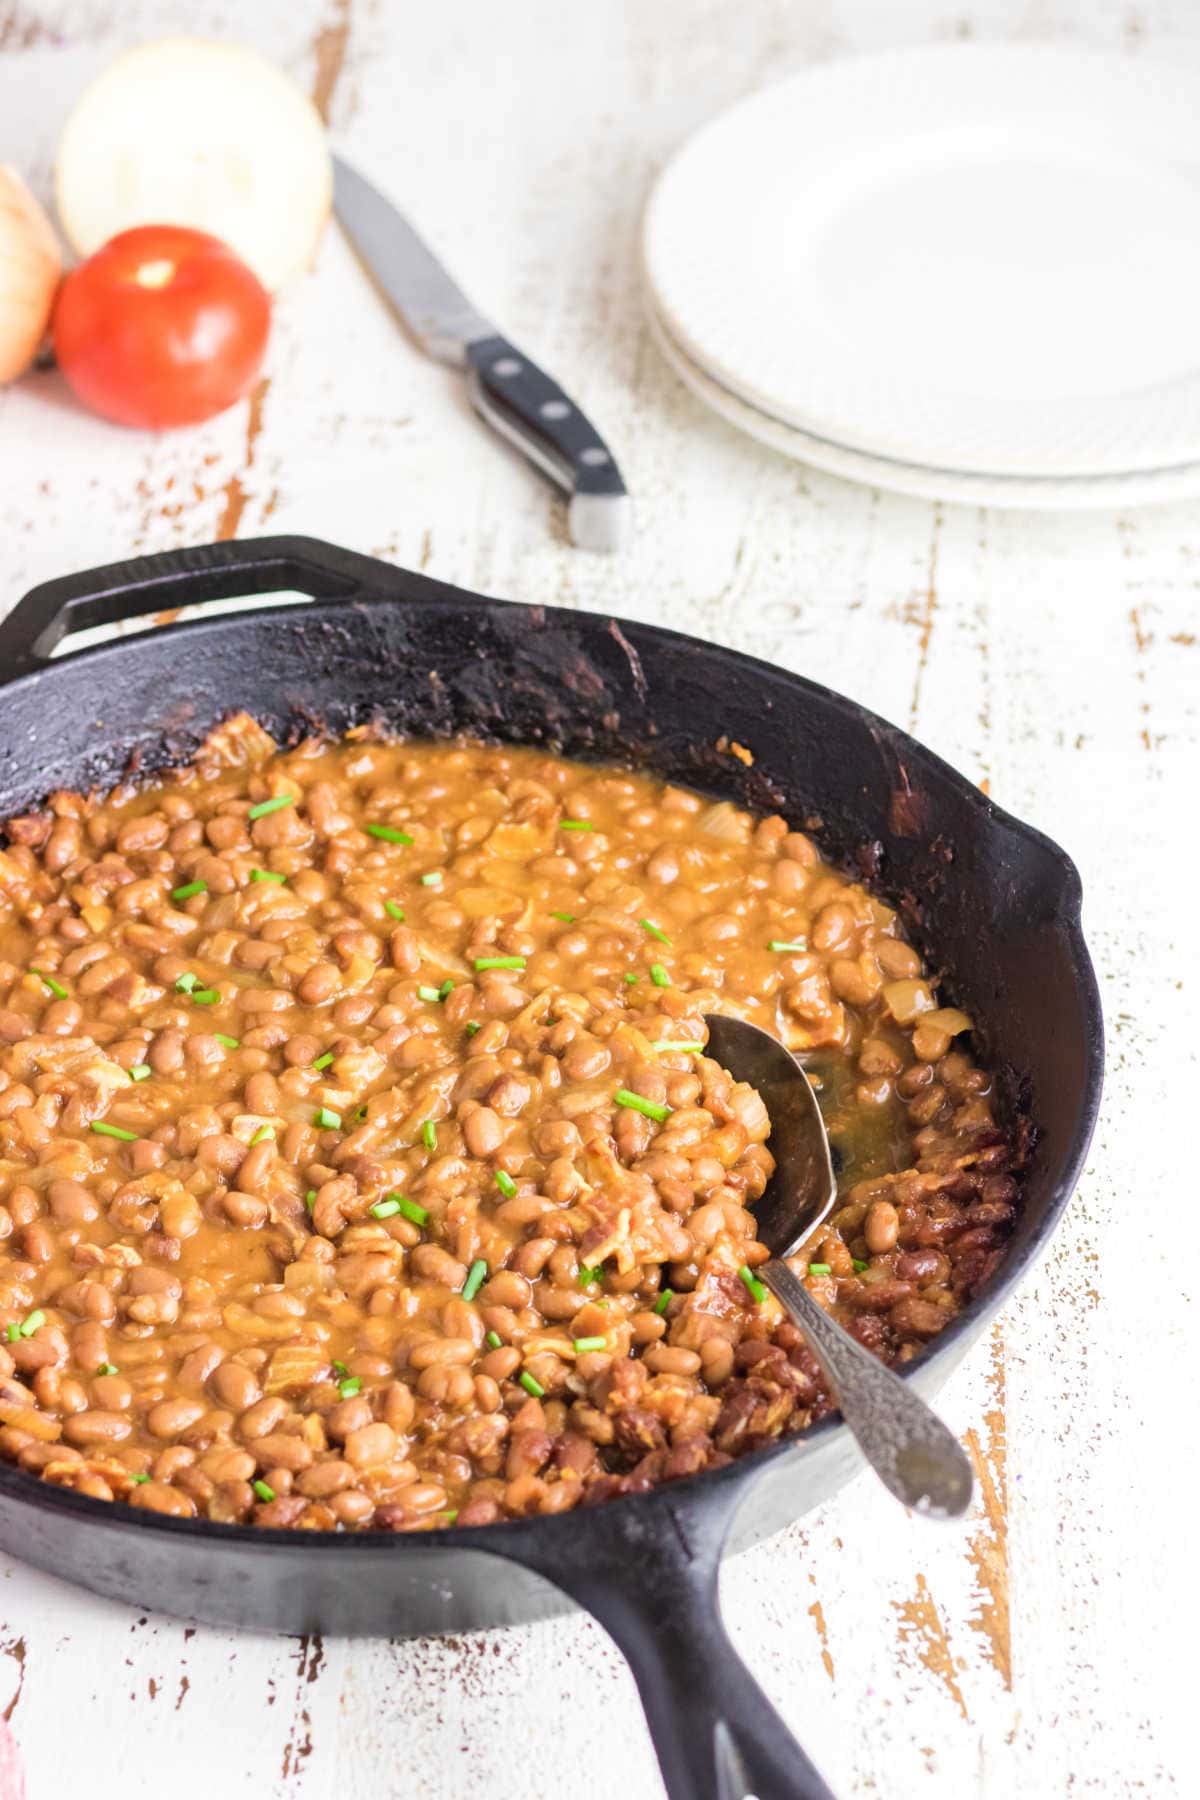 Finished baked beans in a skillet.